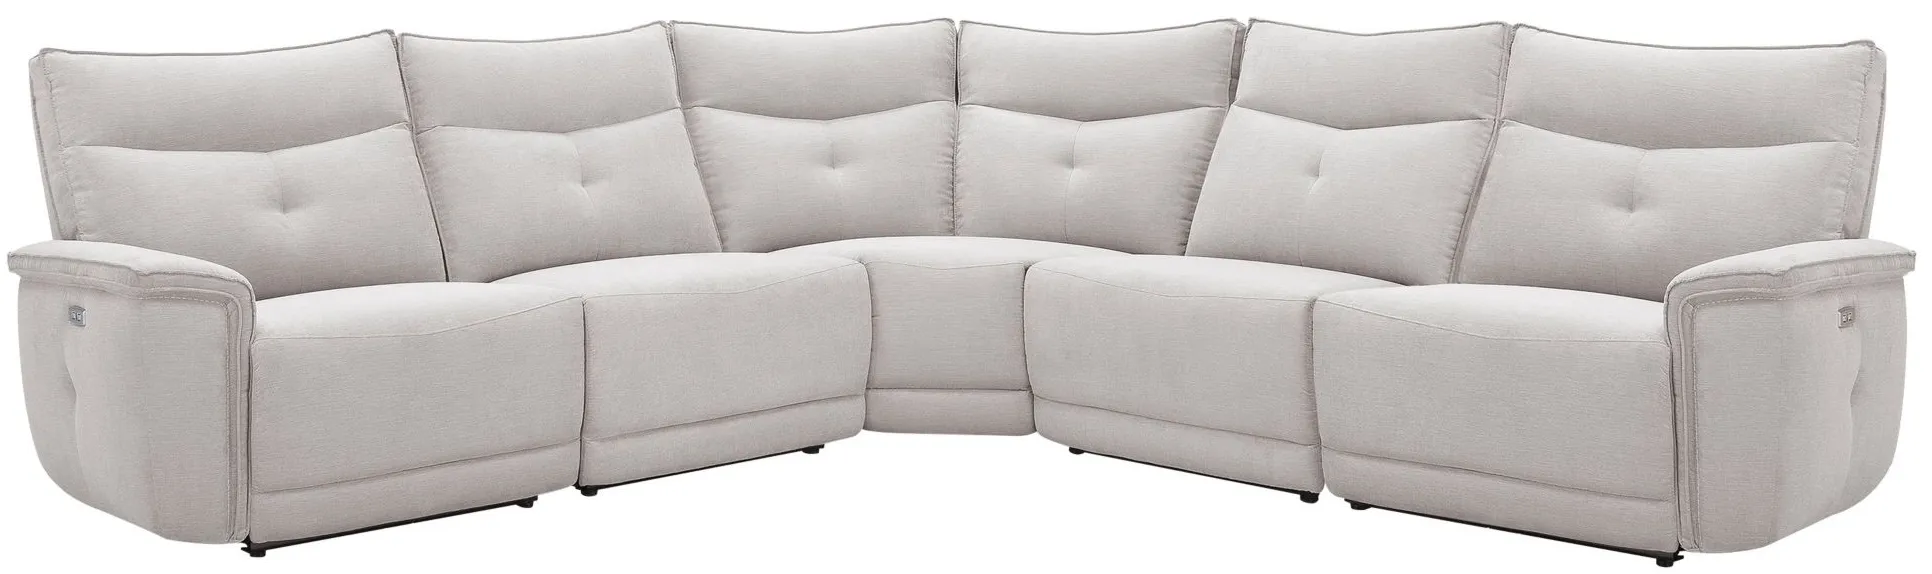 Graceland 5-pc. Sectional Sofa w/Power Headrests in Mist Gray by Bellanest